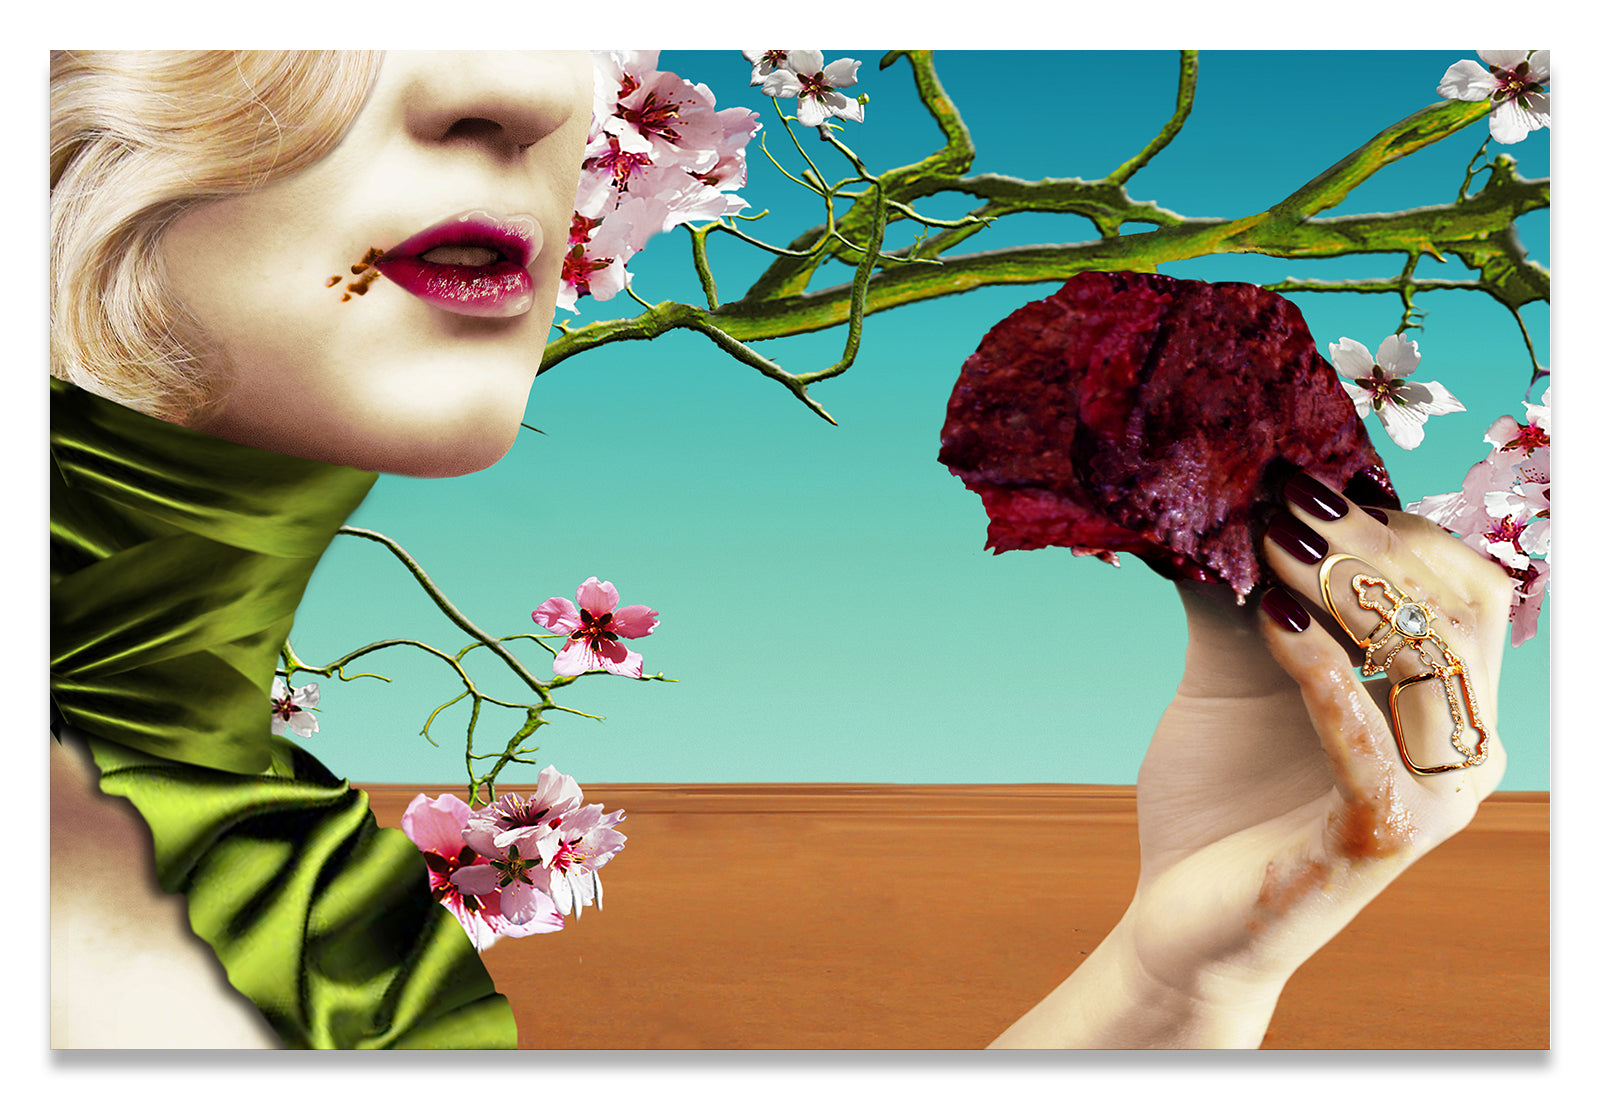 Surreal Portrait of Woman Eating a Steak Under Almond Blossoms in the Desert.